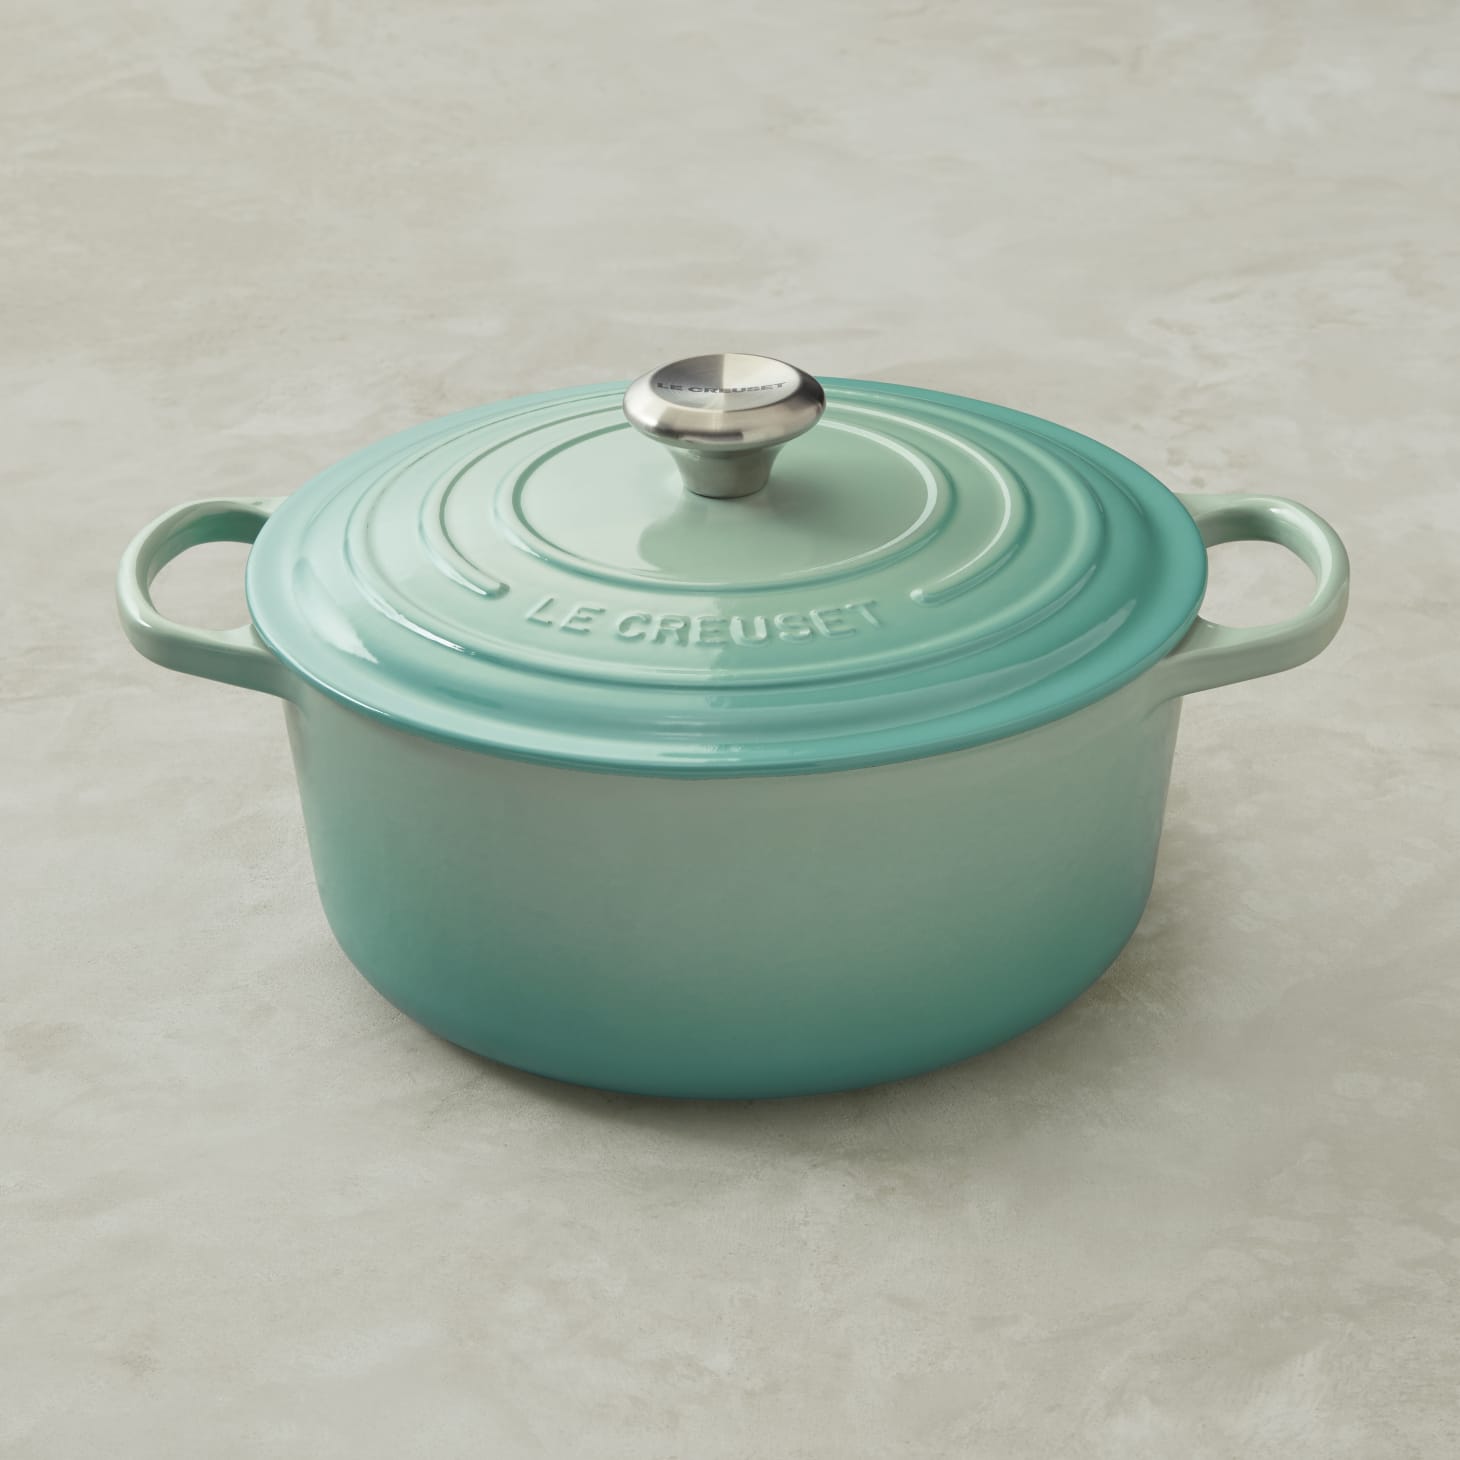 Williams Sonoma New Creuset Collection Color Kitchn